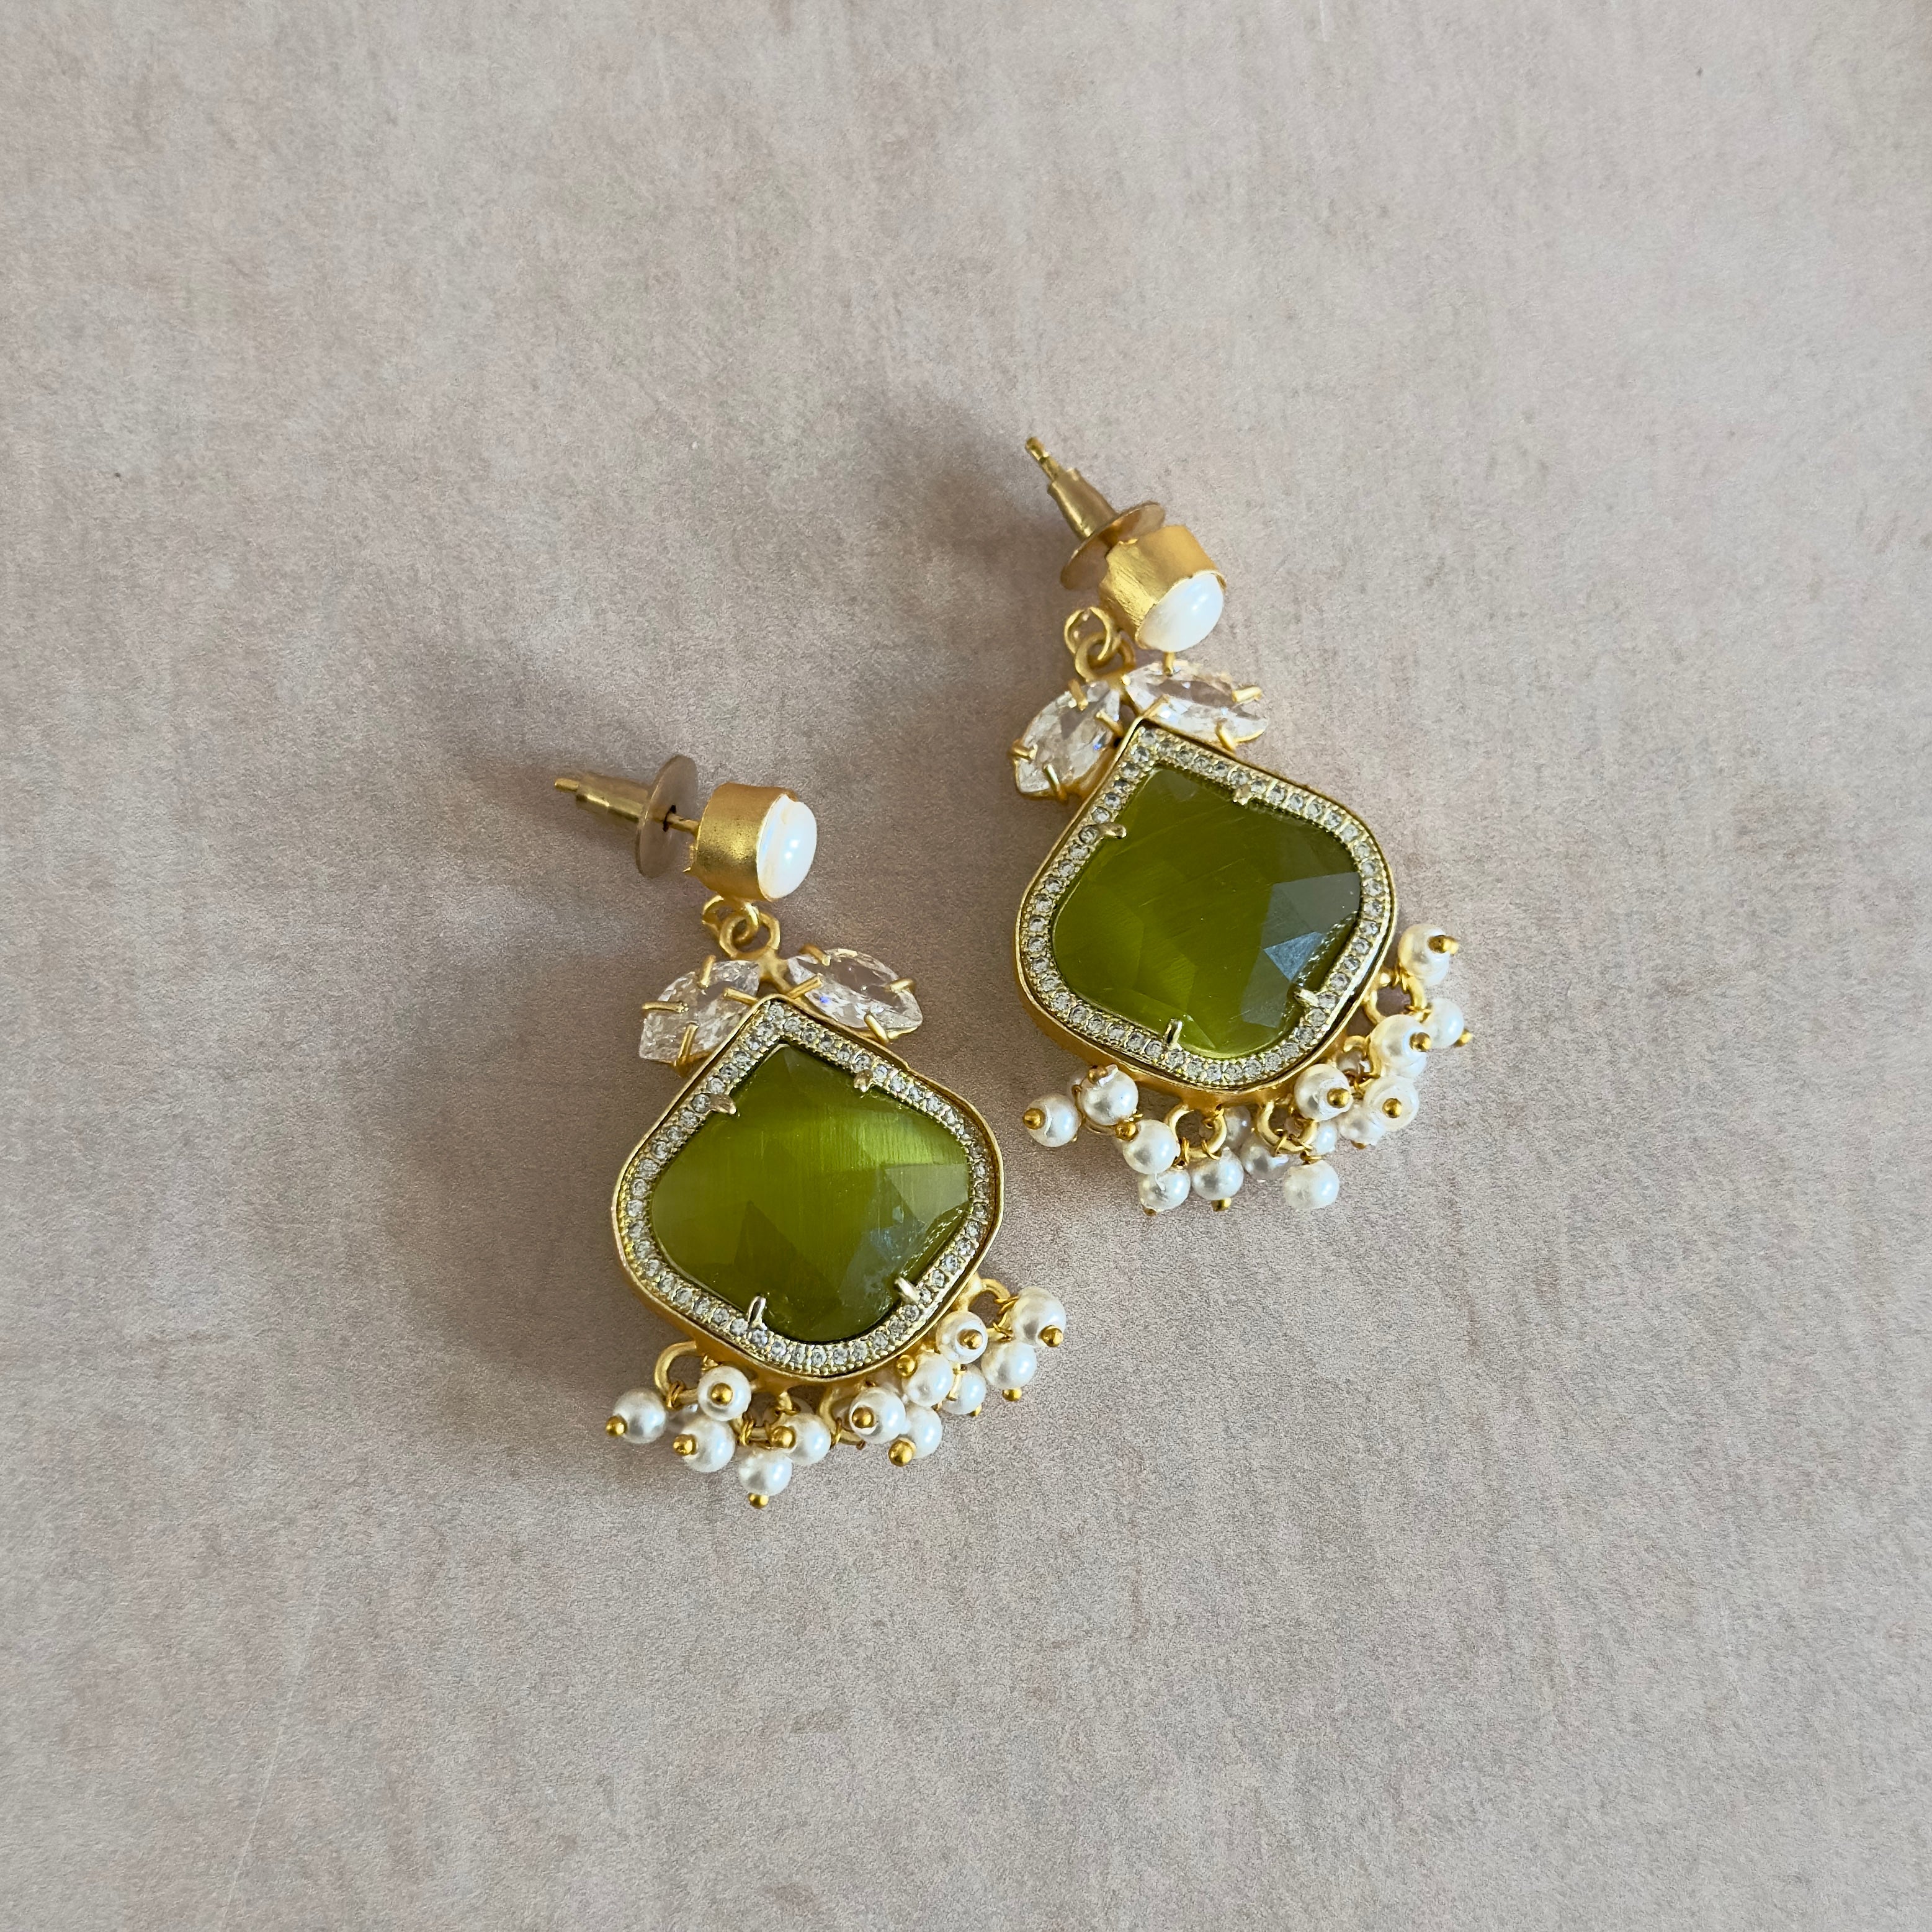 Elevate your style with our Gaia Olive Pearl Drop Earrings! The stunning vibrant olive stone paired with a delicate pearl accent and sparkling crystal details will add a touch of elegance to any outfit. Stand out and make a statement with these eye-catching earrings.